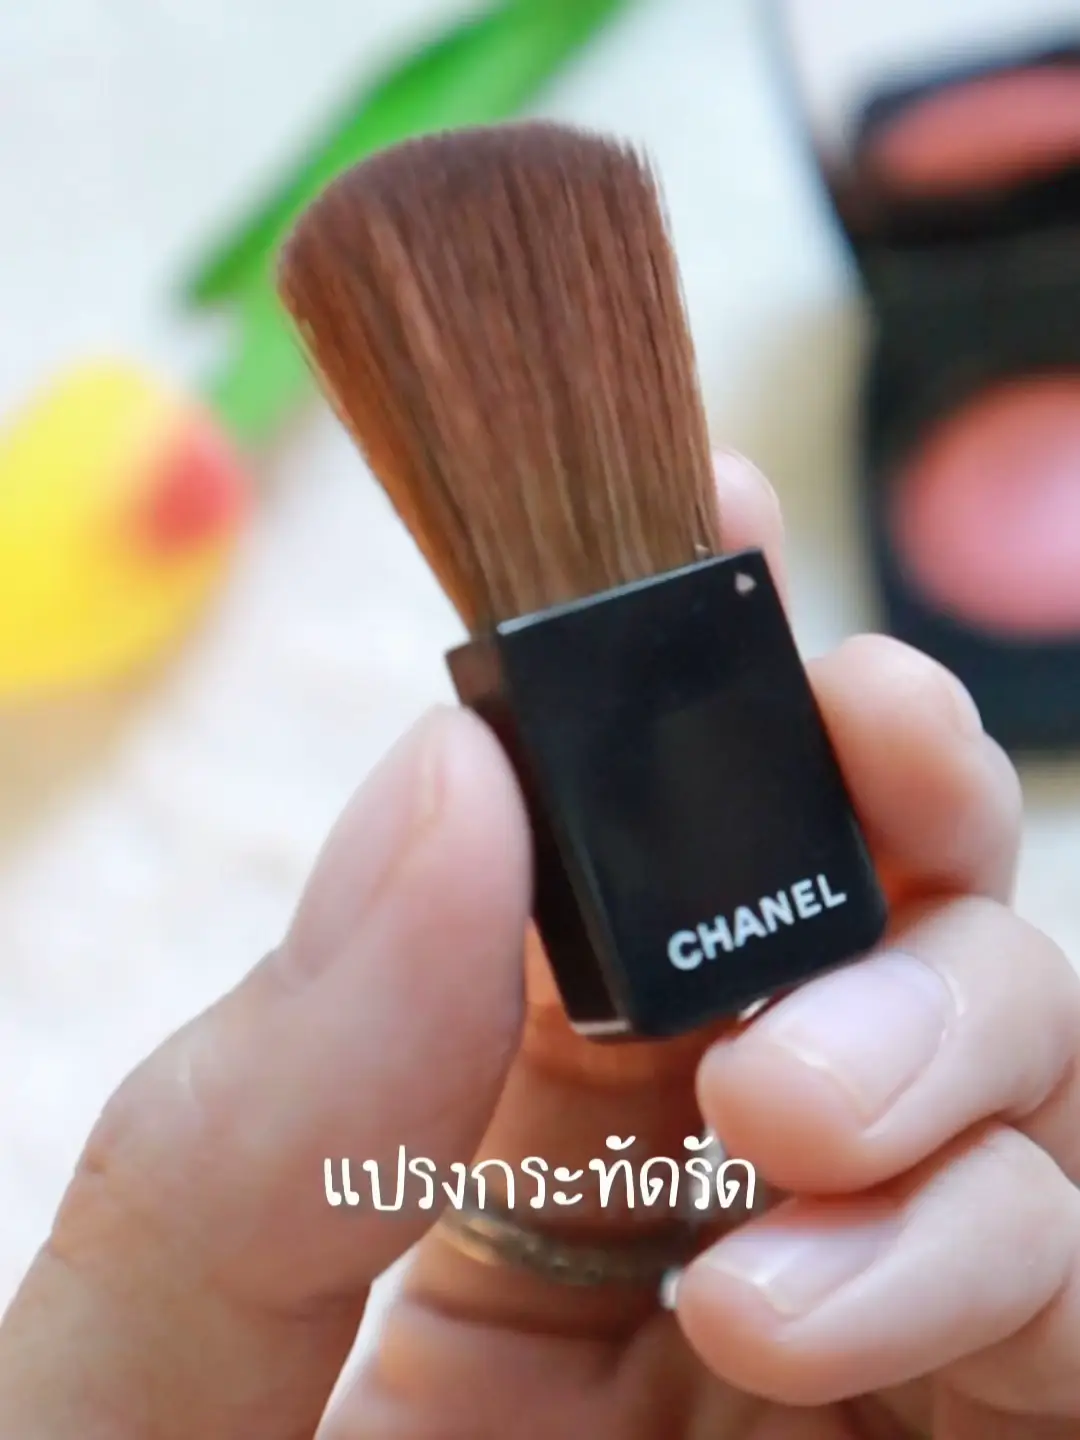 Review✨ CHANEL JOUES CONTRASTE เบอร์ 170, Video published by 🍋Miinkmink🍋